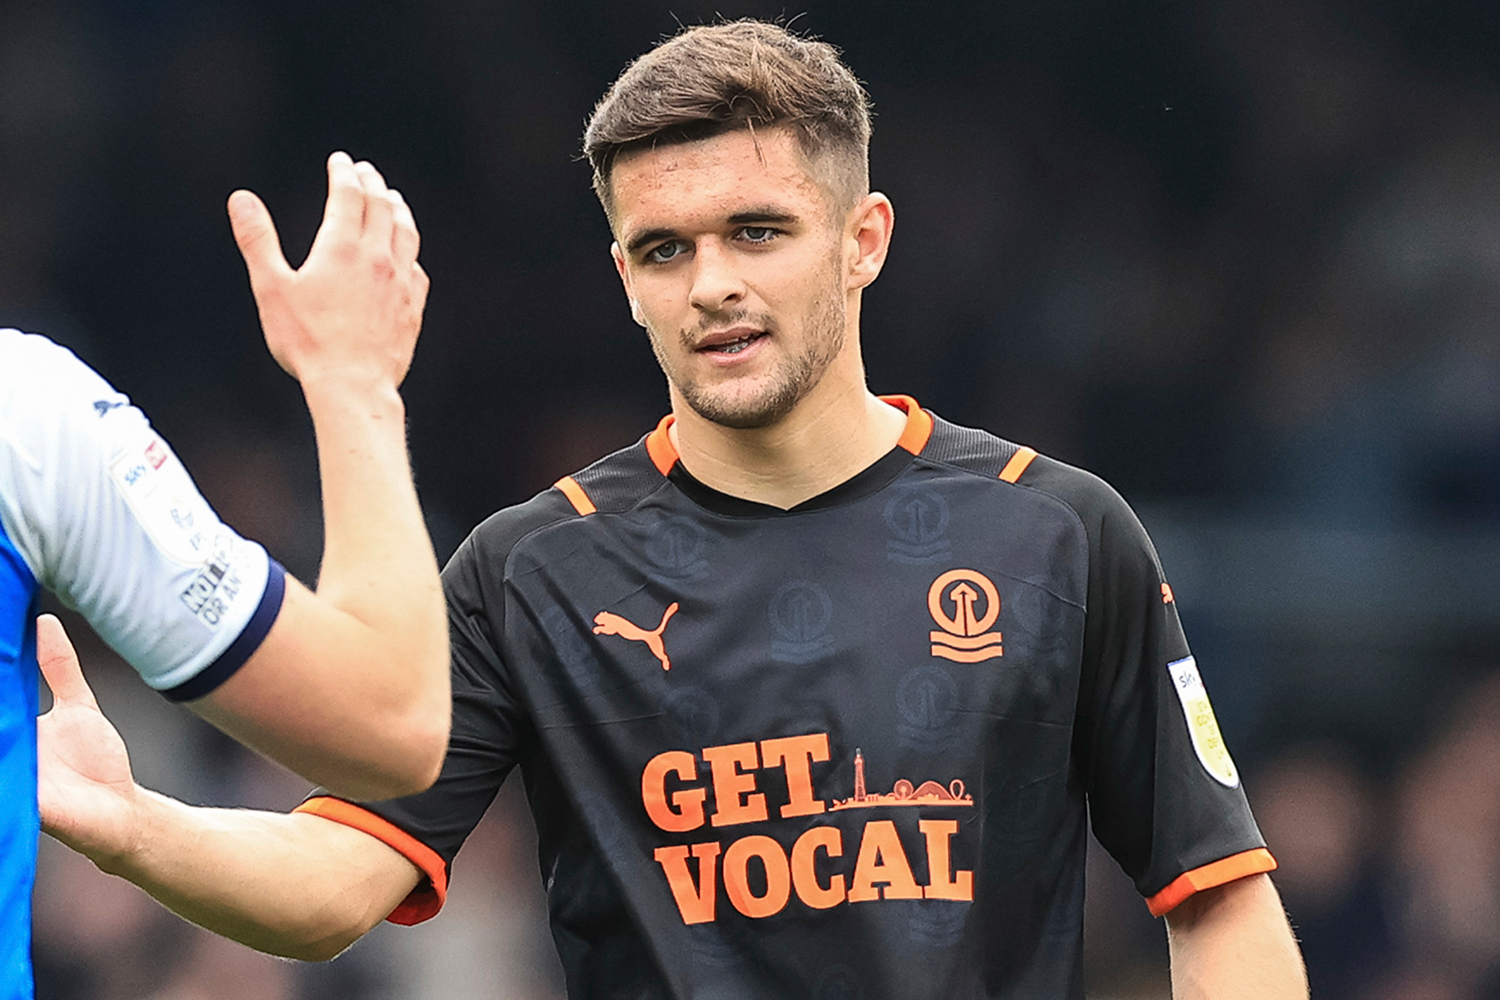 Sport is reacting to the bravery of 17-year-old Blackpool player Jake Daniels who came out as gay yesterday, becoming the UK’s first active male professional footballer to come out publicly.